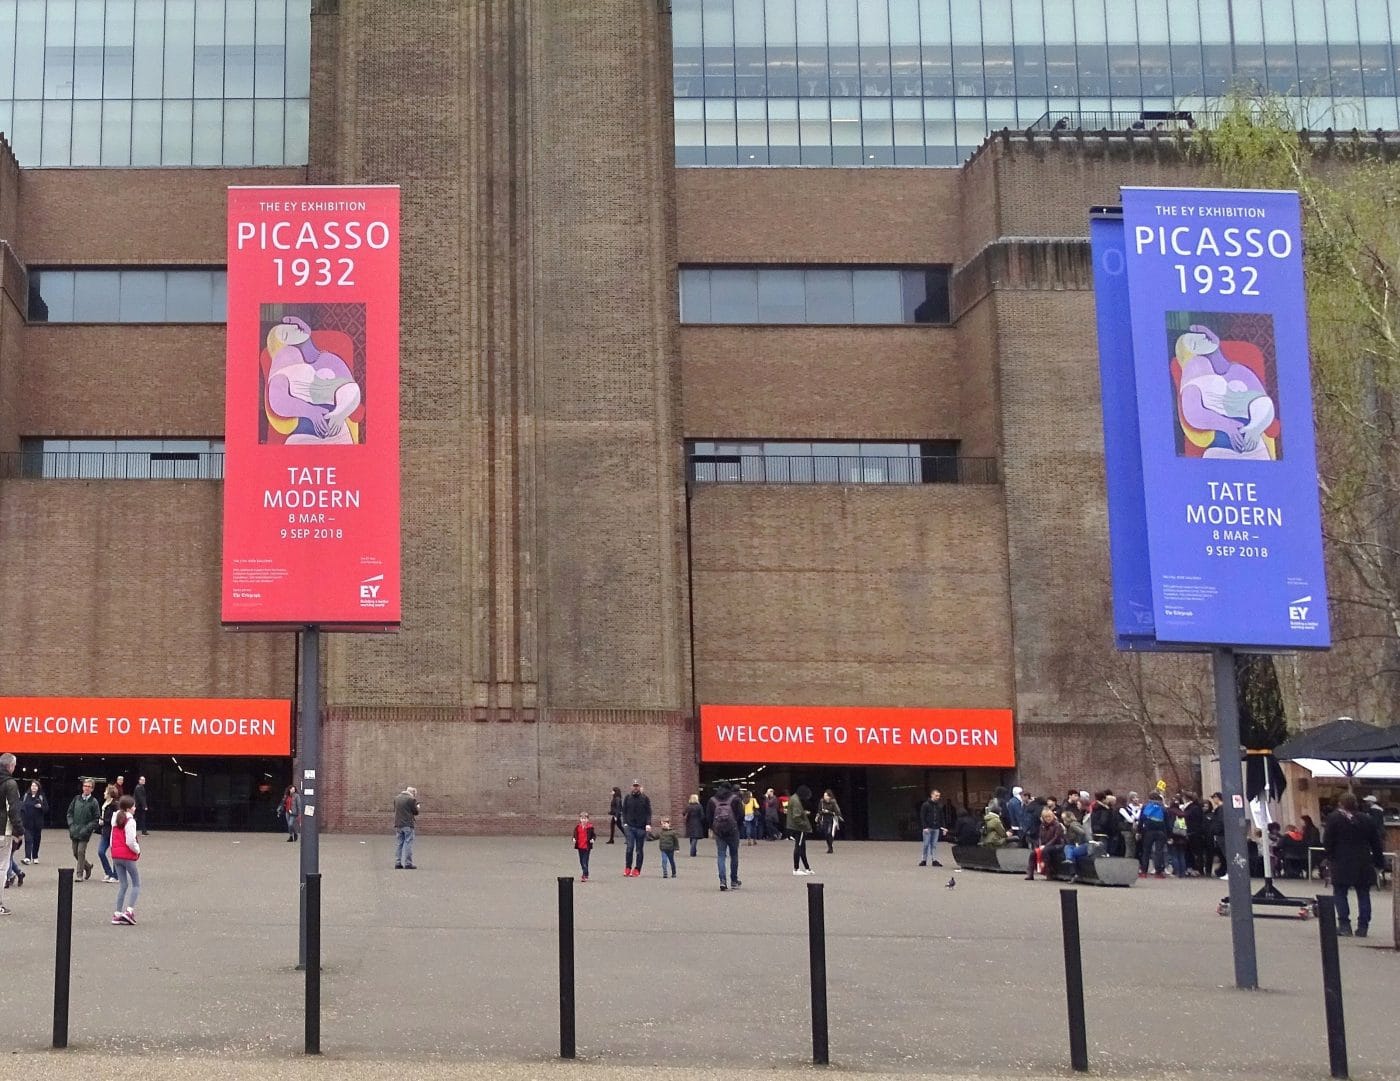 Take in an exhibition at Tate Modern